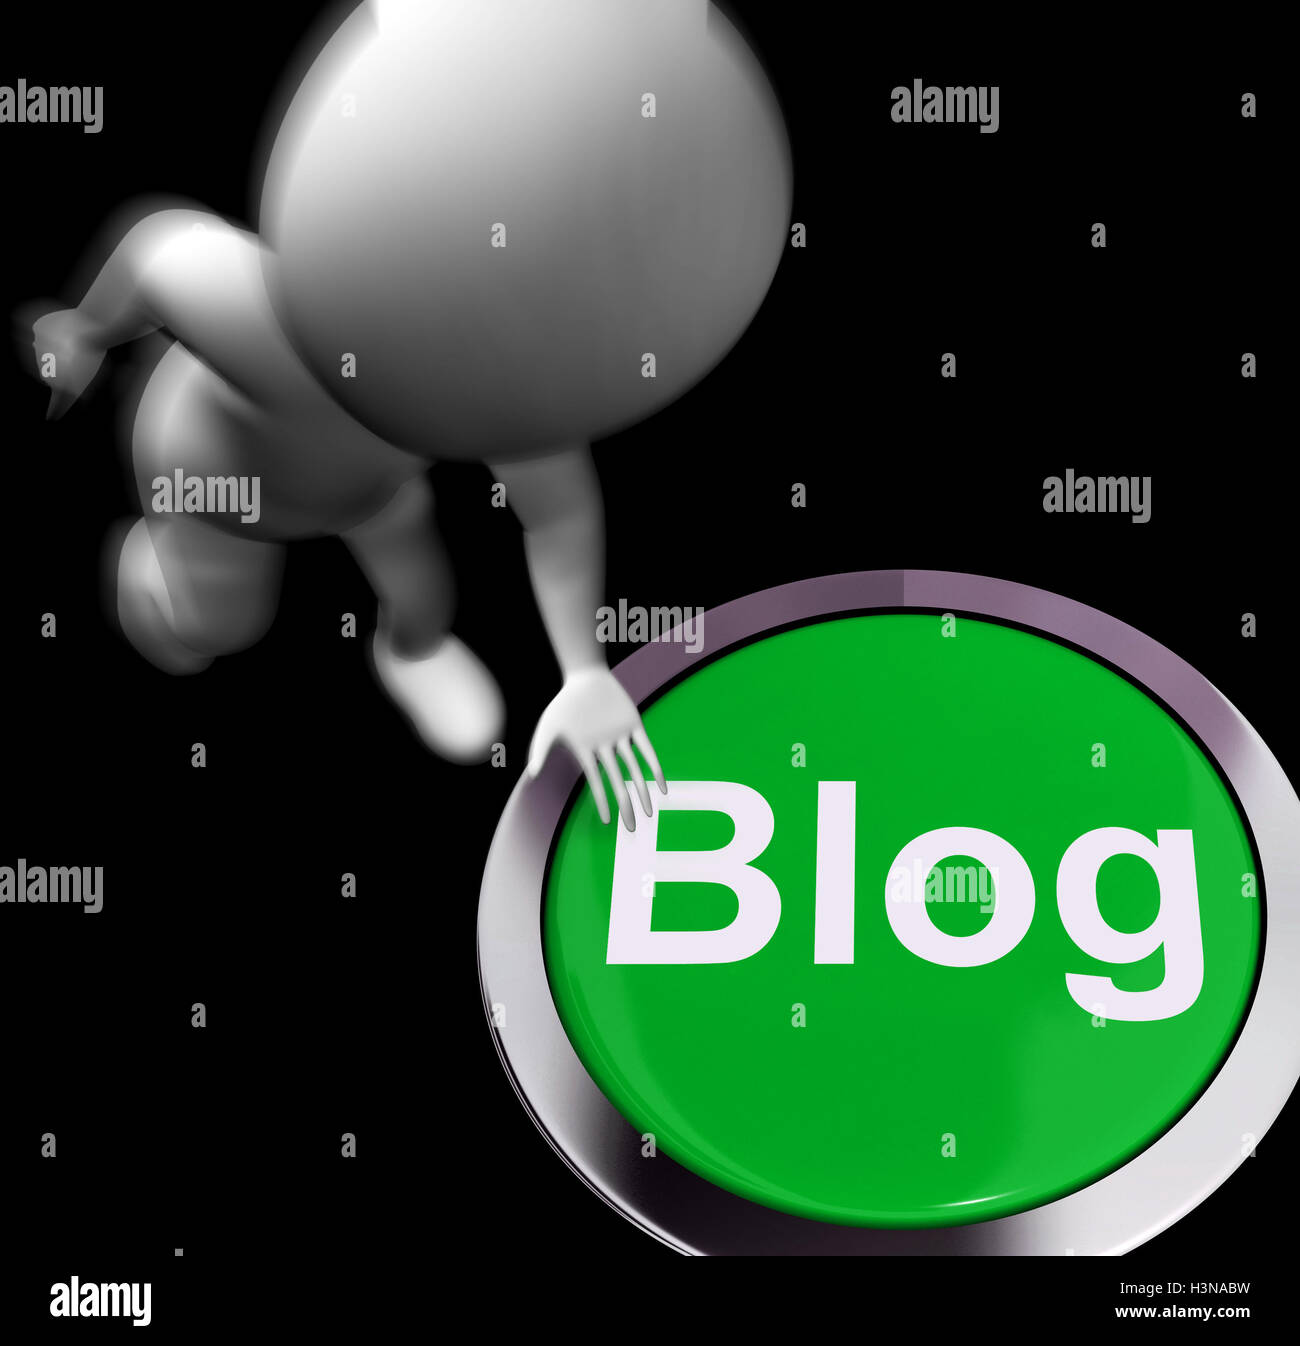 Blog Pressed Means Information Or Expressing Thoughts Online Stock Photo